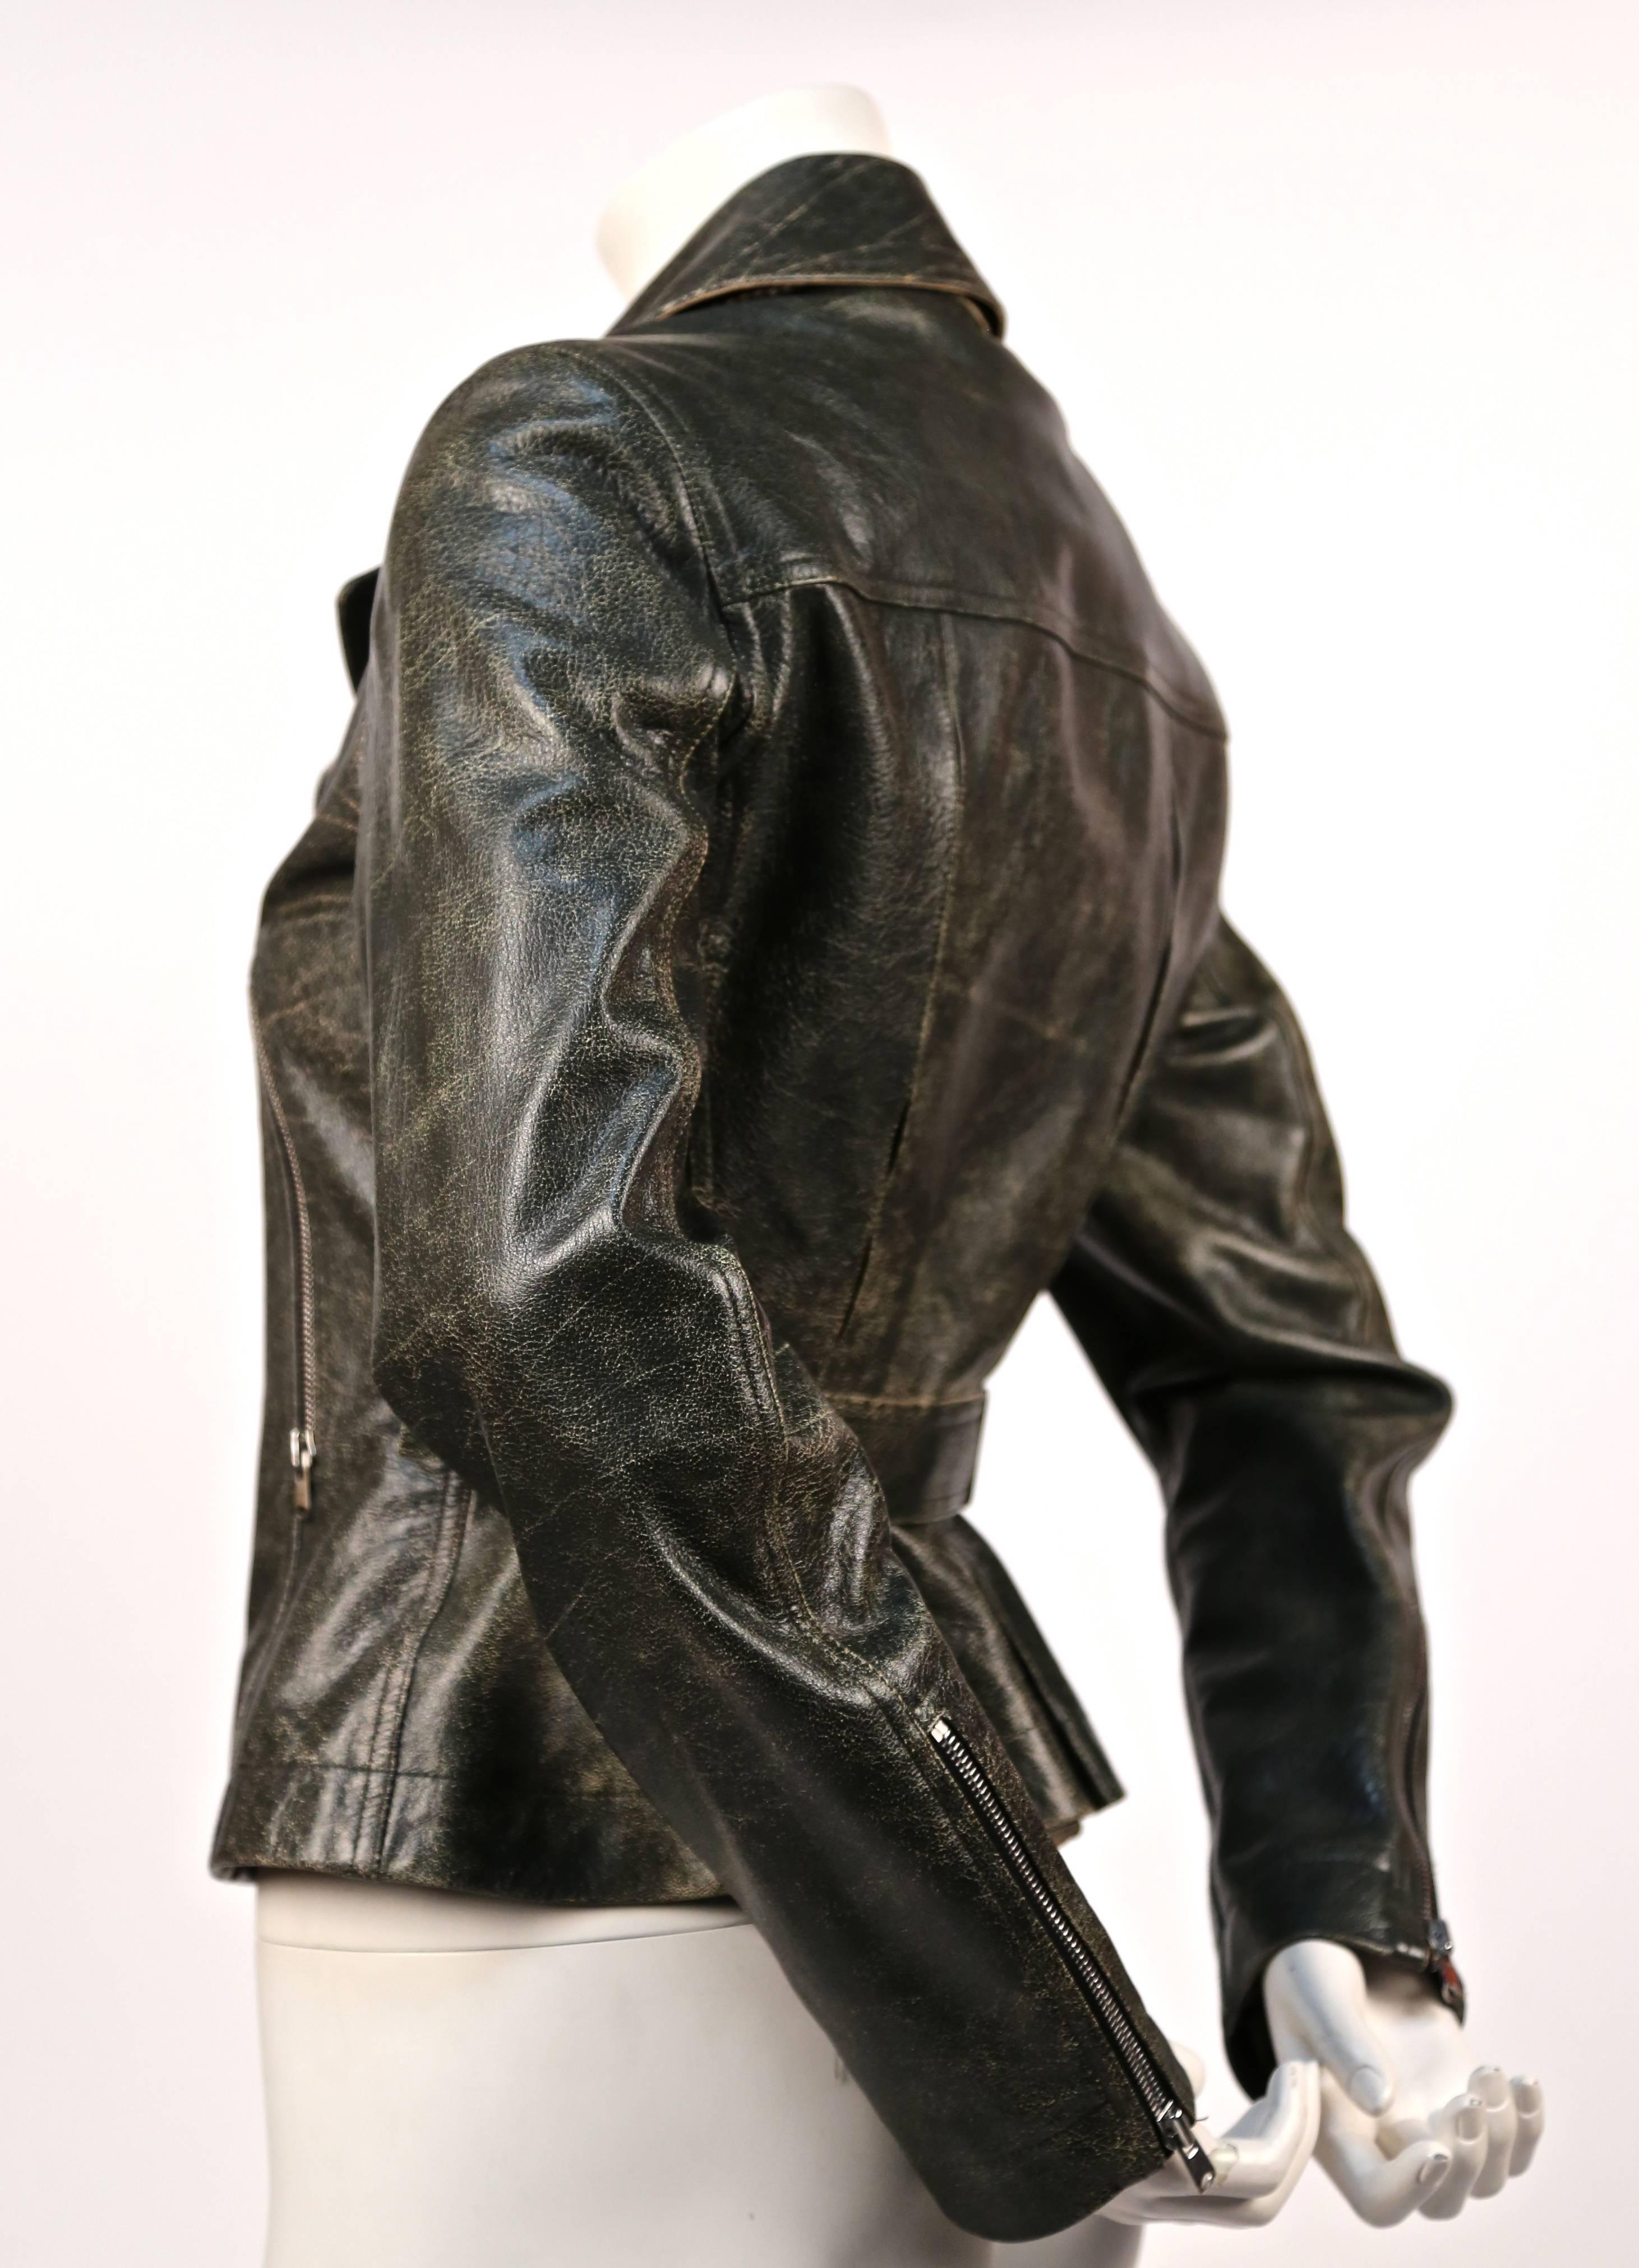 Classic motorcycle jacket made with unique dark khaki green distressed leather, silver hardware and lace up detail at back from Azzedine Alaia. French size 40, although this jacket runs small and best fits a FR 38. Approximate measurements: